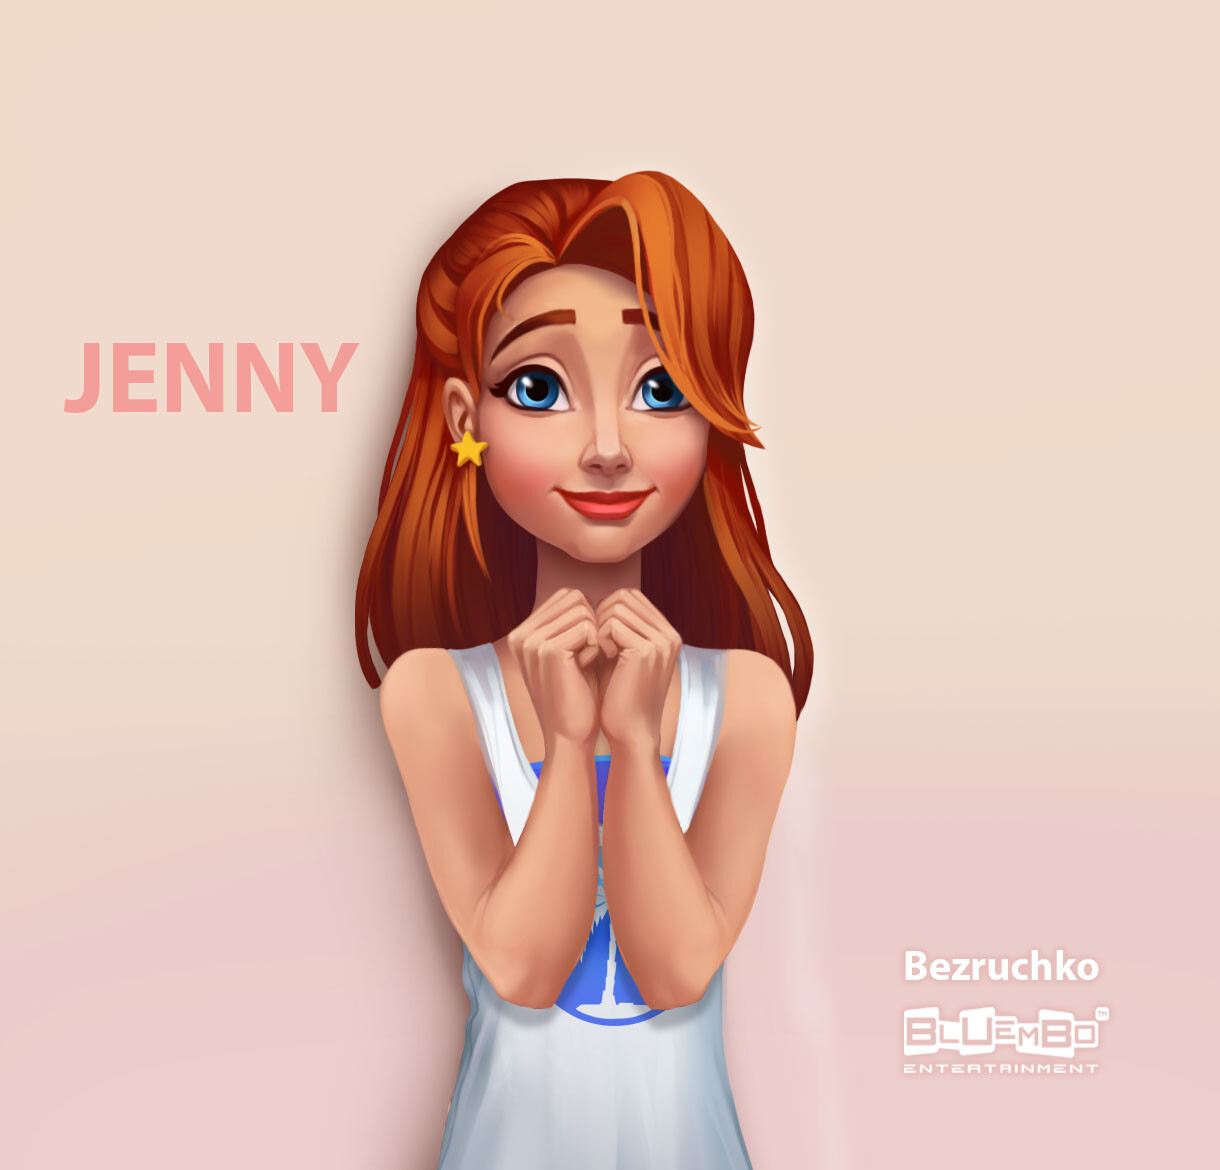 Seemore jenny ComeDepot. 